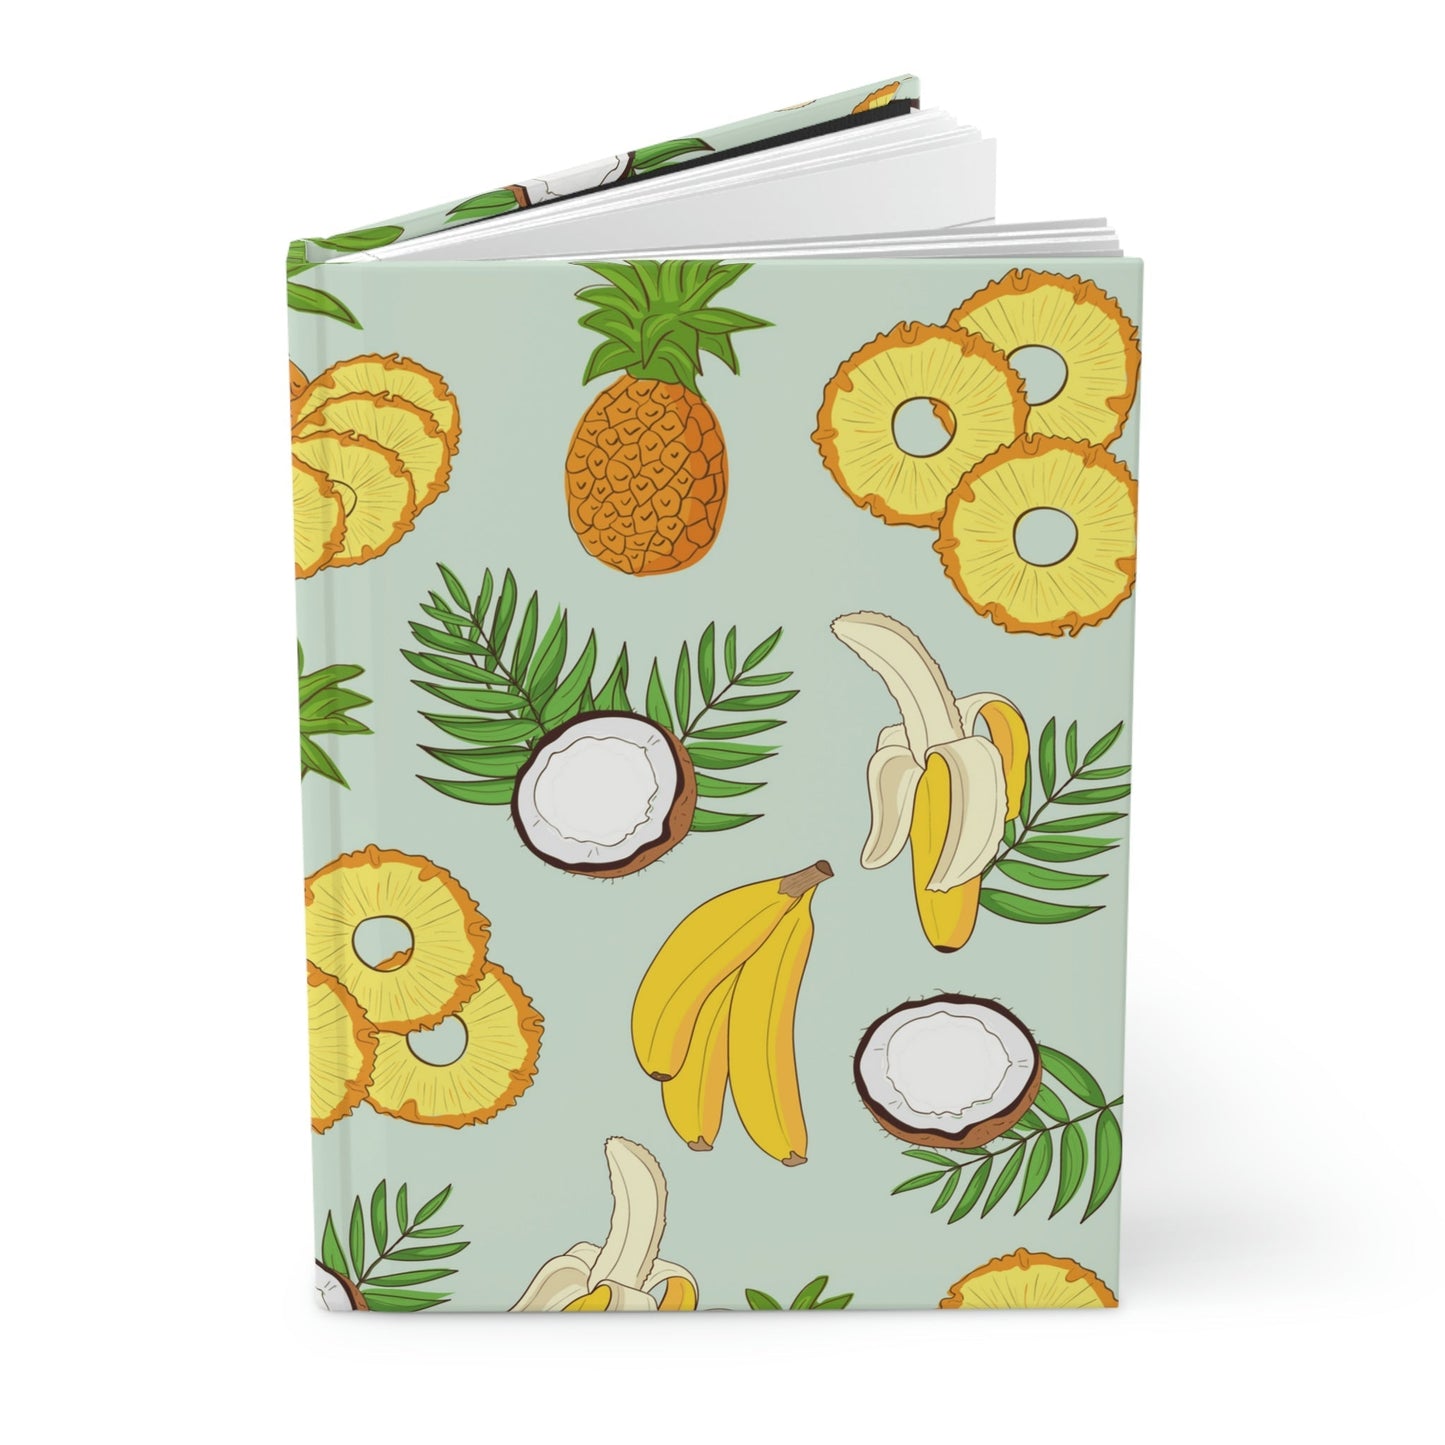 Pina Colada Hardcover Matte Journal Paper products Pink Sweetheart